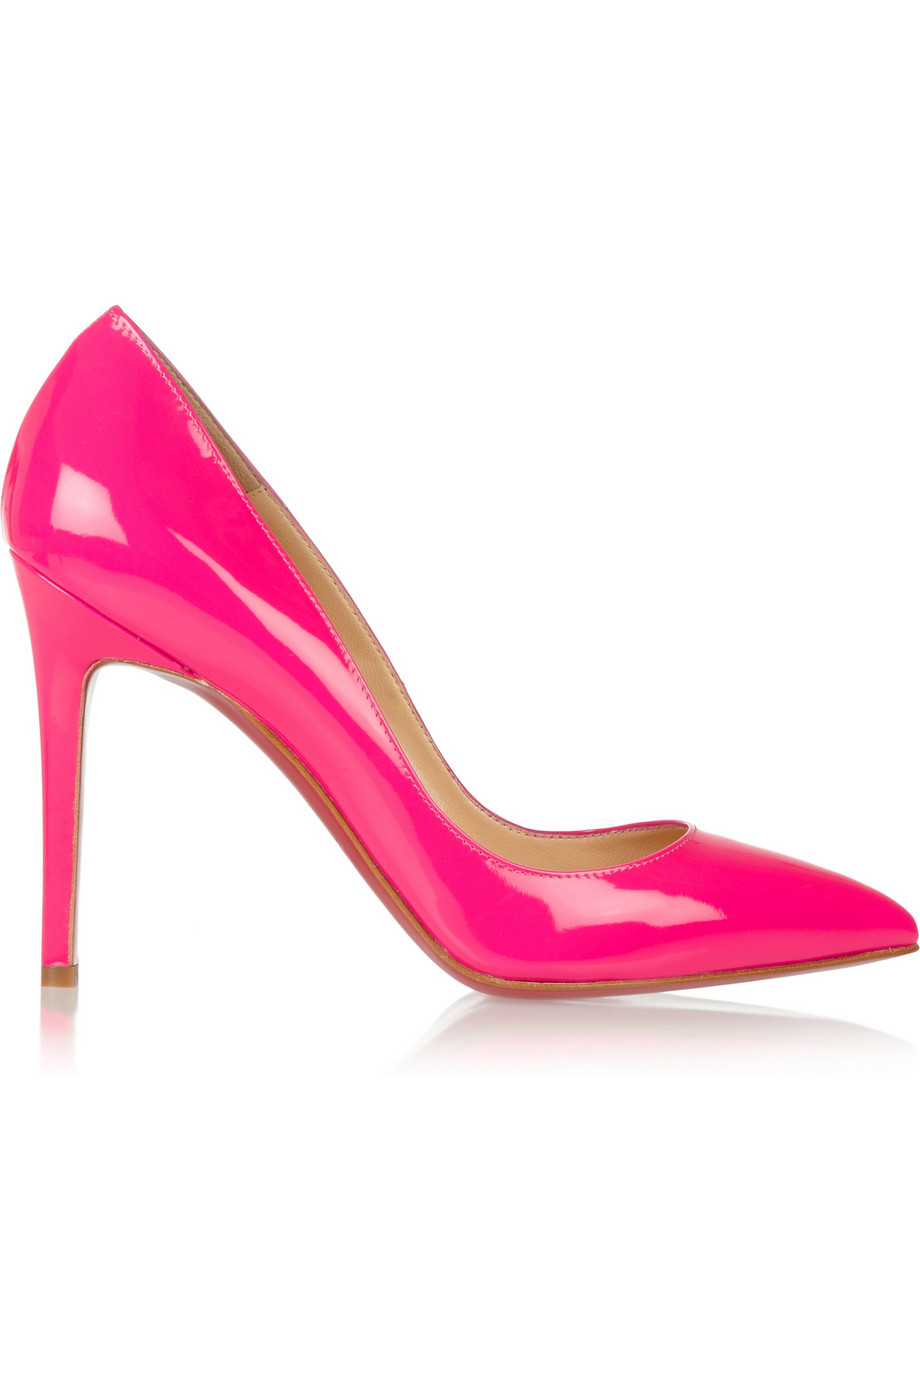 Shoeniverse: Pigalle pumps in bright hot pink by Christian Louboutin